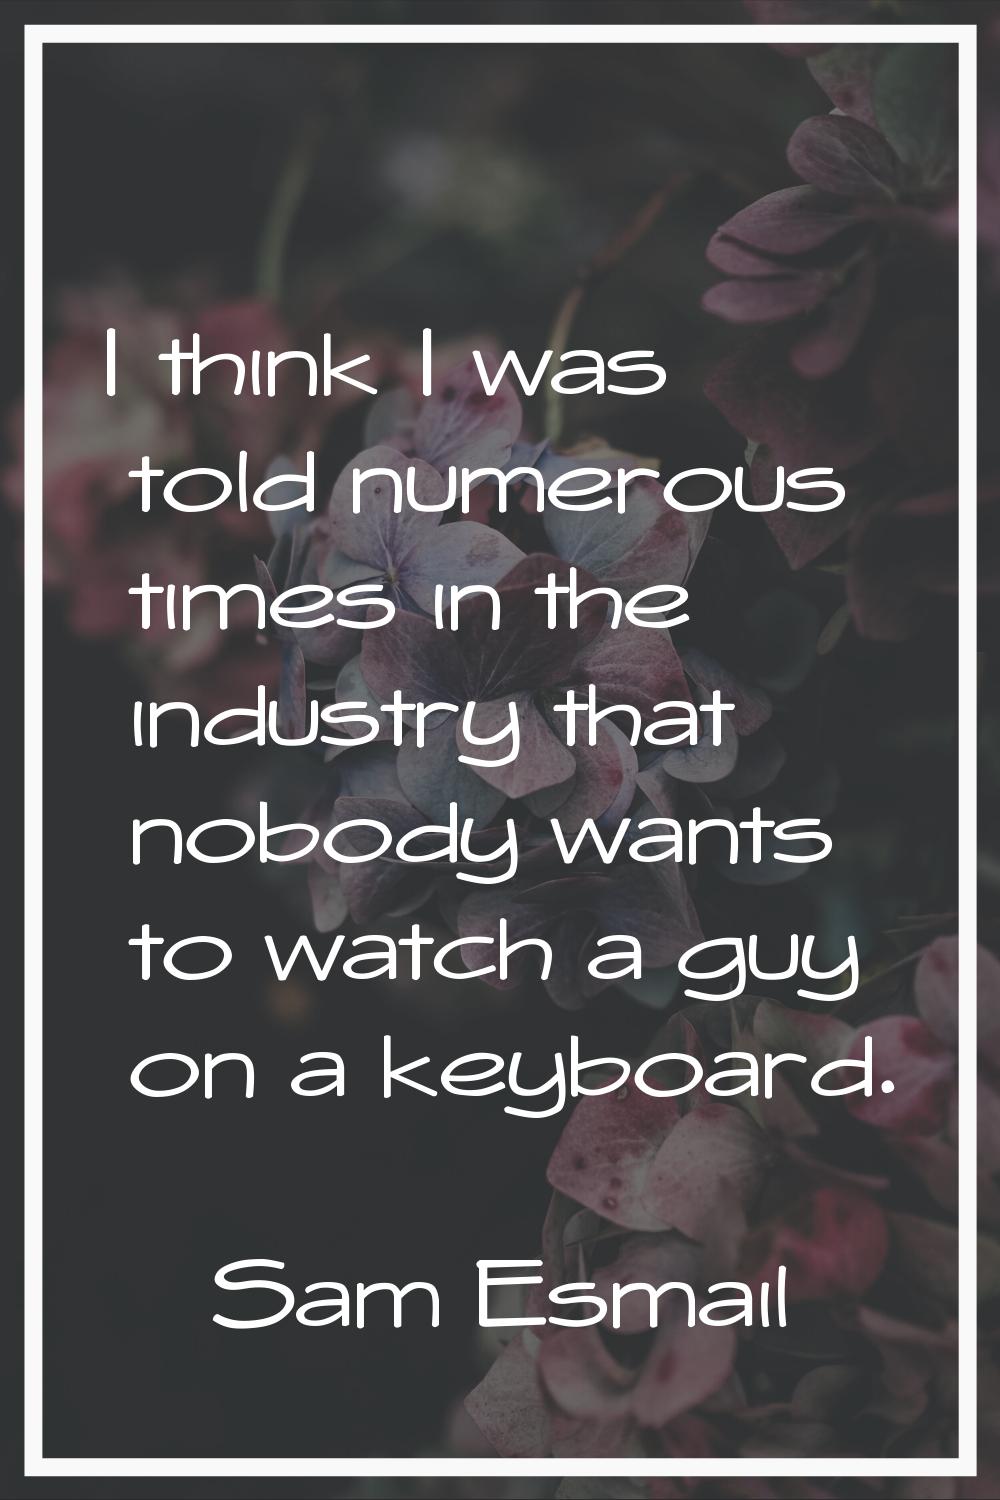 I think I was told numerous times in the industry that nobody wants to watch a guy on a keyboard.